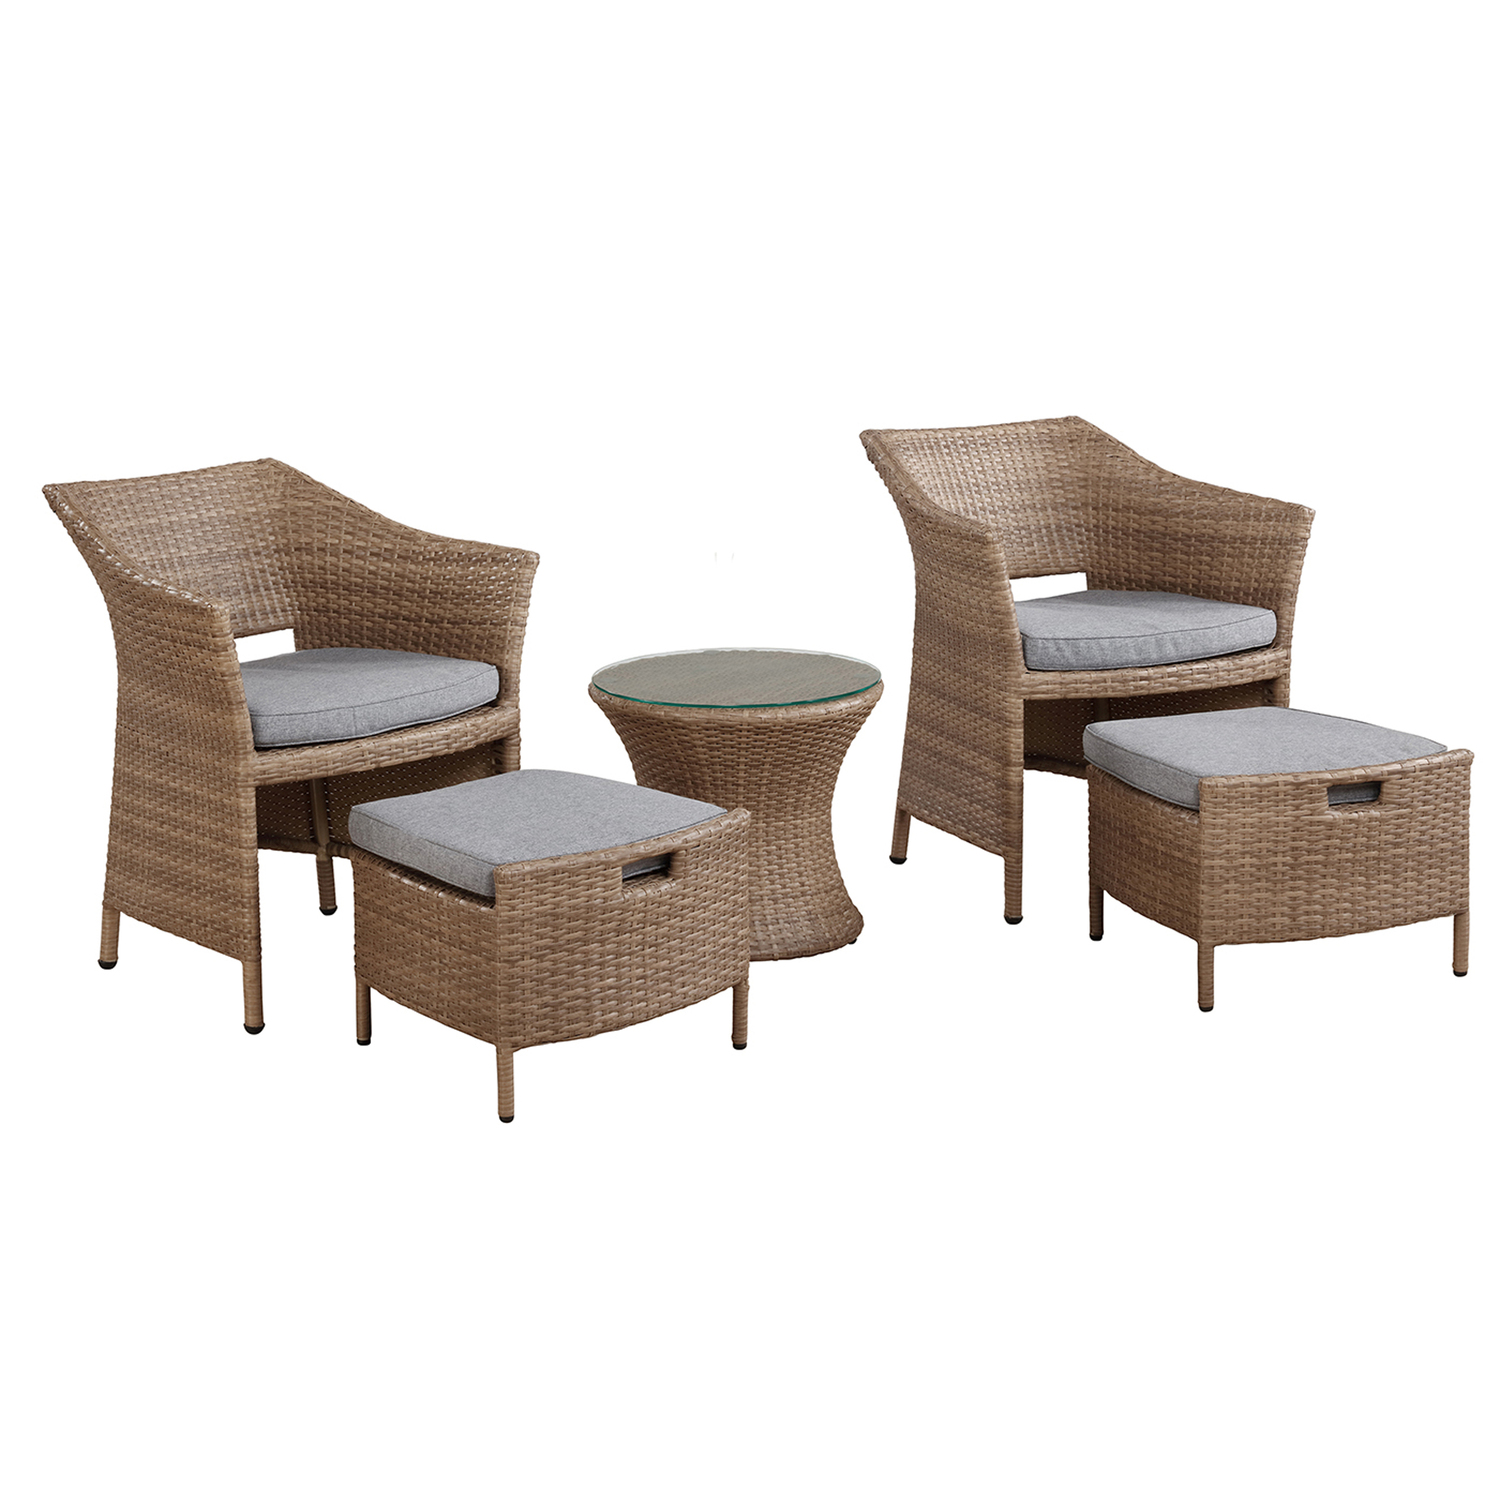 Kokoli All-Weather Conversation Set with Set of 2 Chairs with Ottomans and 17"H Accent Table - image 1 of 9